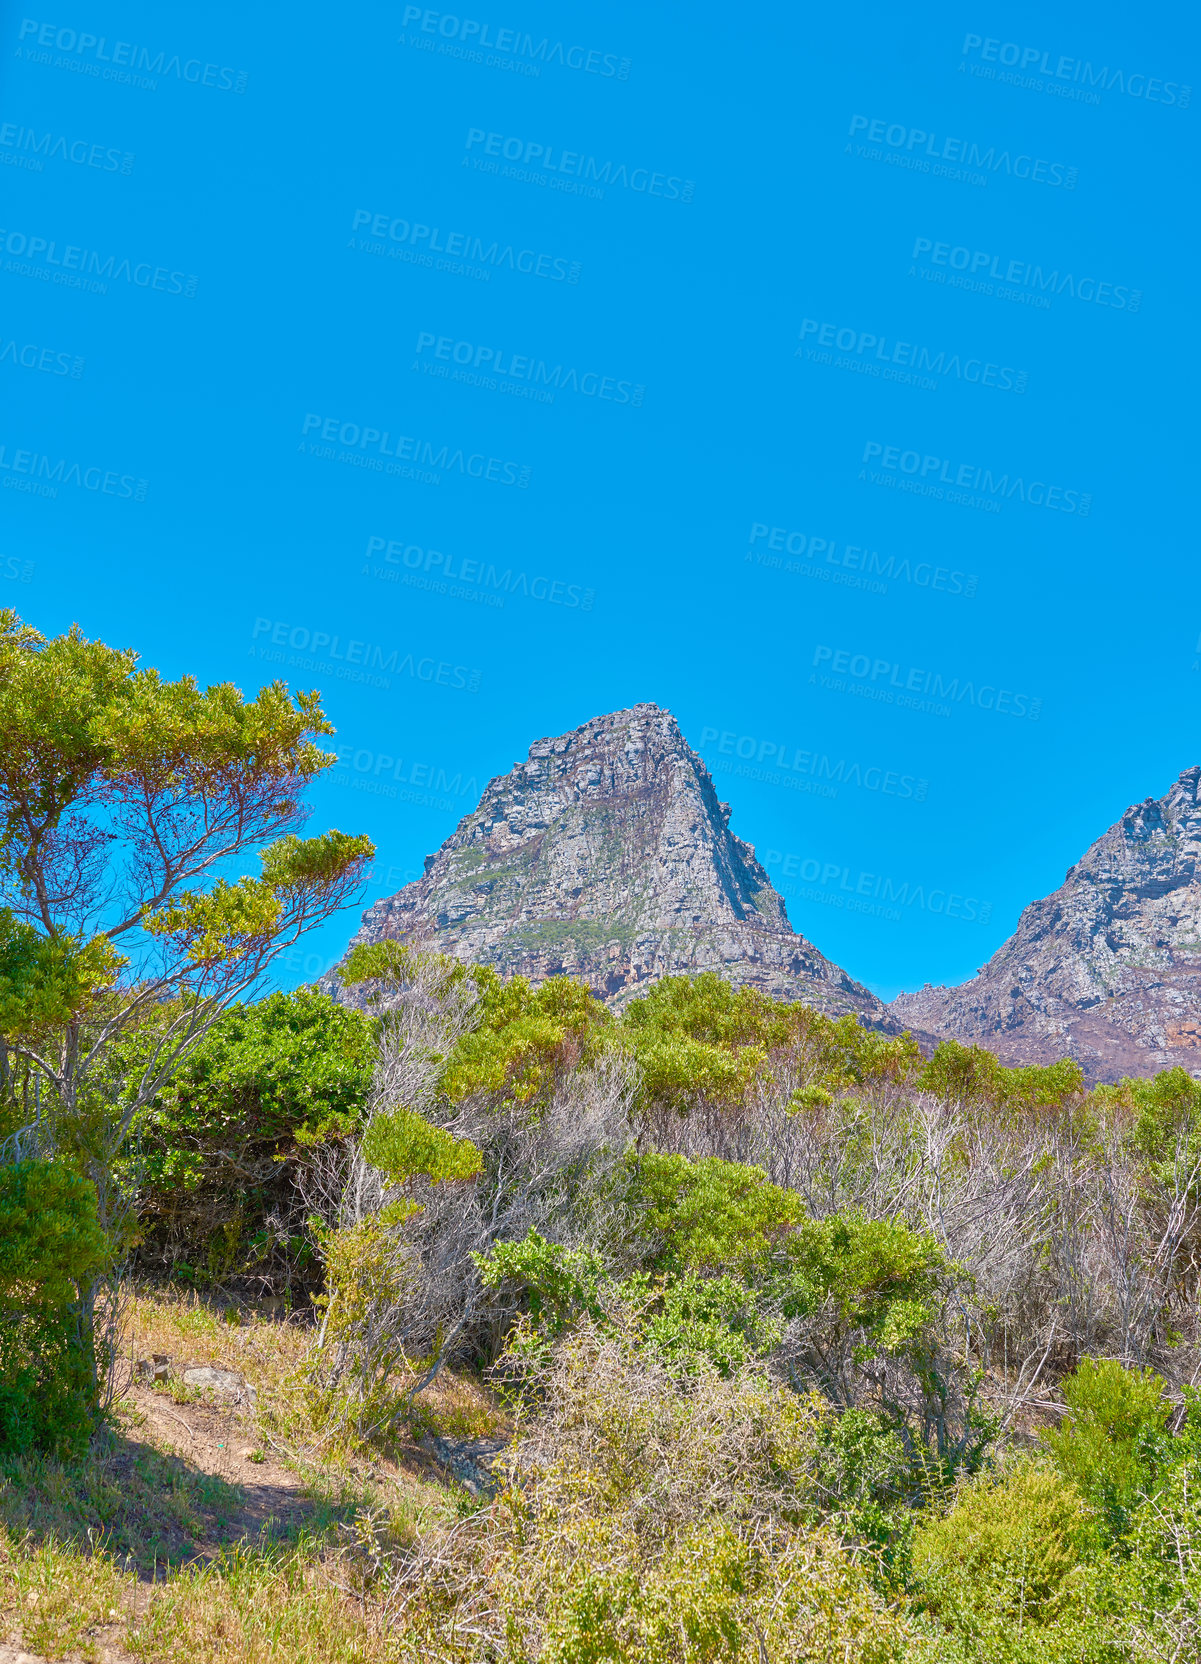 Buy stock photo Scenic mountain landscape view with blue sky with copy space of Twelve Apostles in Cape Town, South Africa. Famous steep hiking, trekking terrain with growing trees and bushes. Travel and tourism